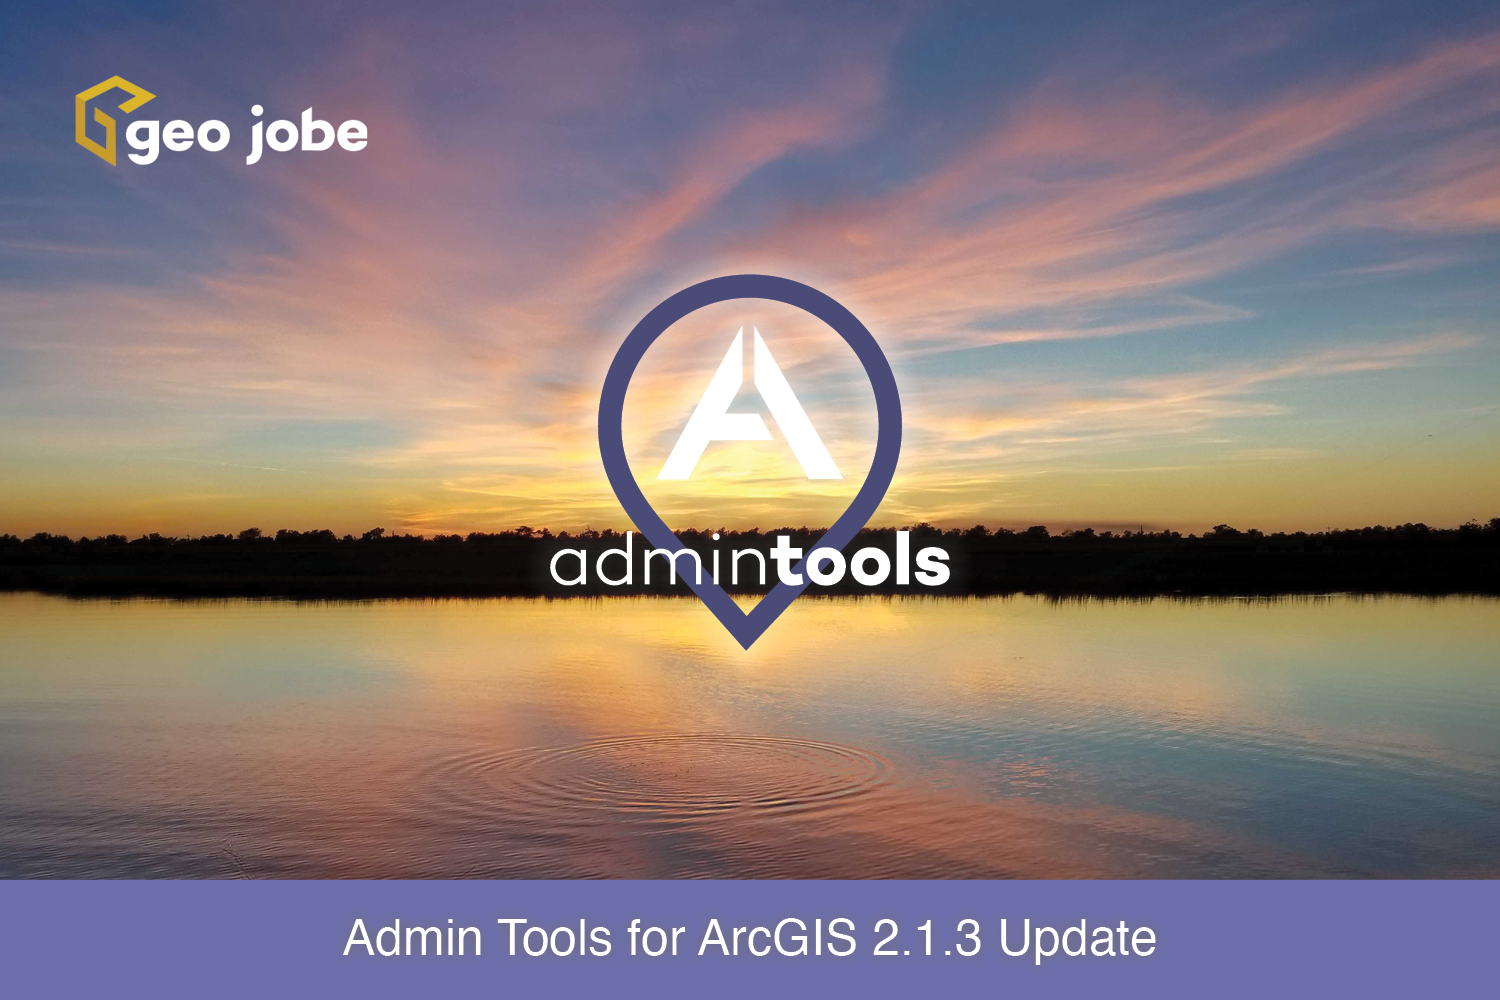 Admin Tools for ArcGIS 2.1.3 Out Now